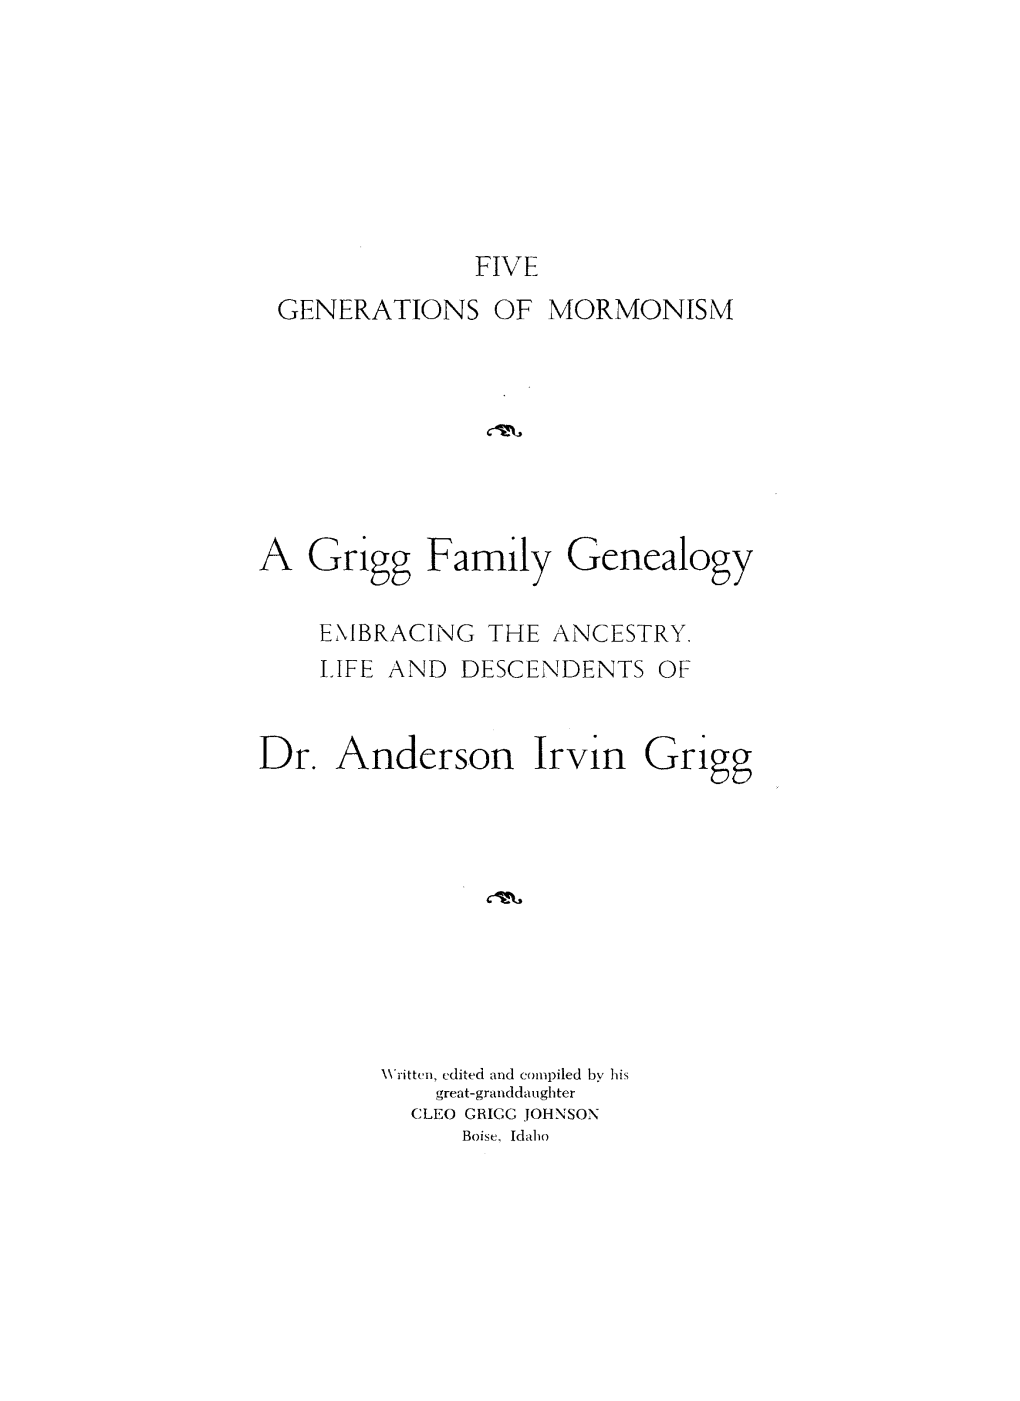 A Grigg Family Genealogy Dr. Anderson Irvin Grigg